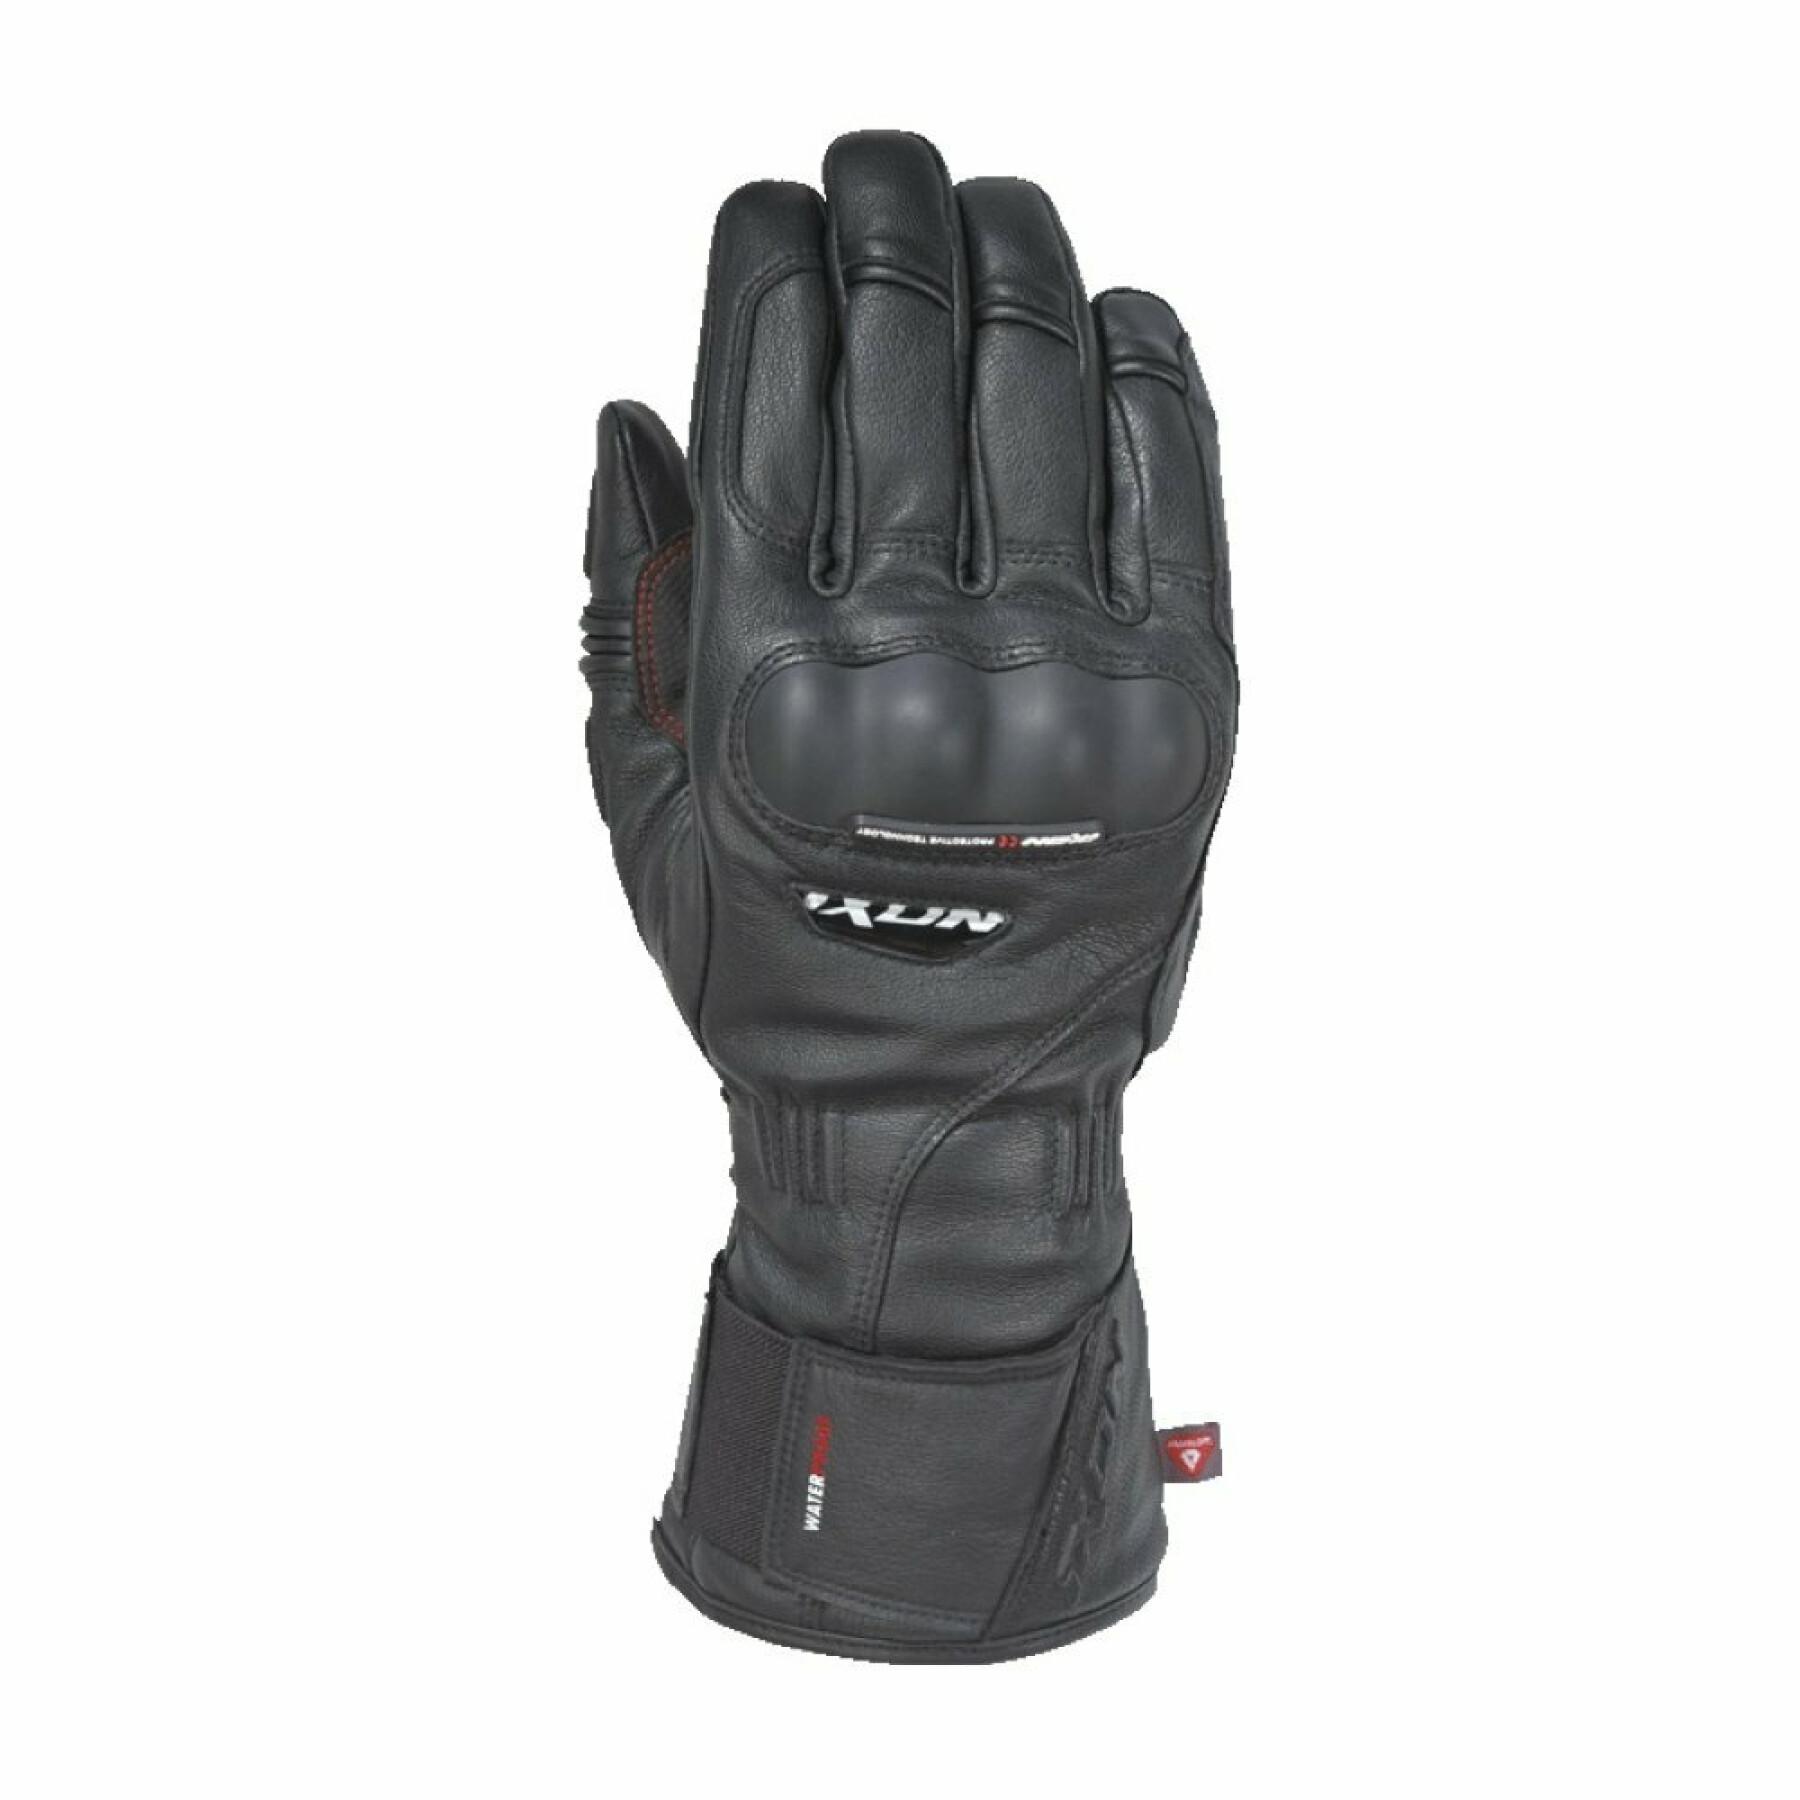 Winter leather motorcycle gloves Ixon pro continental